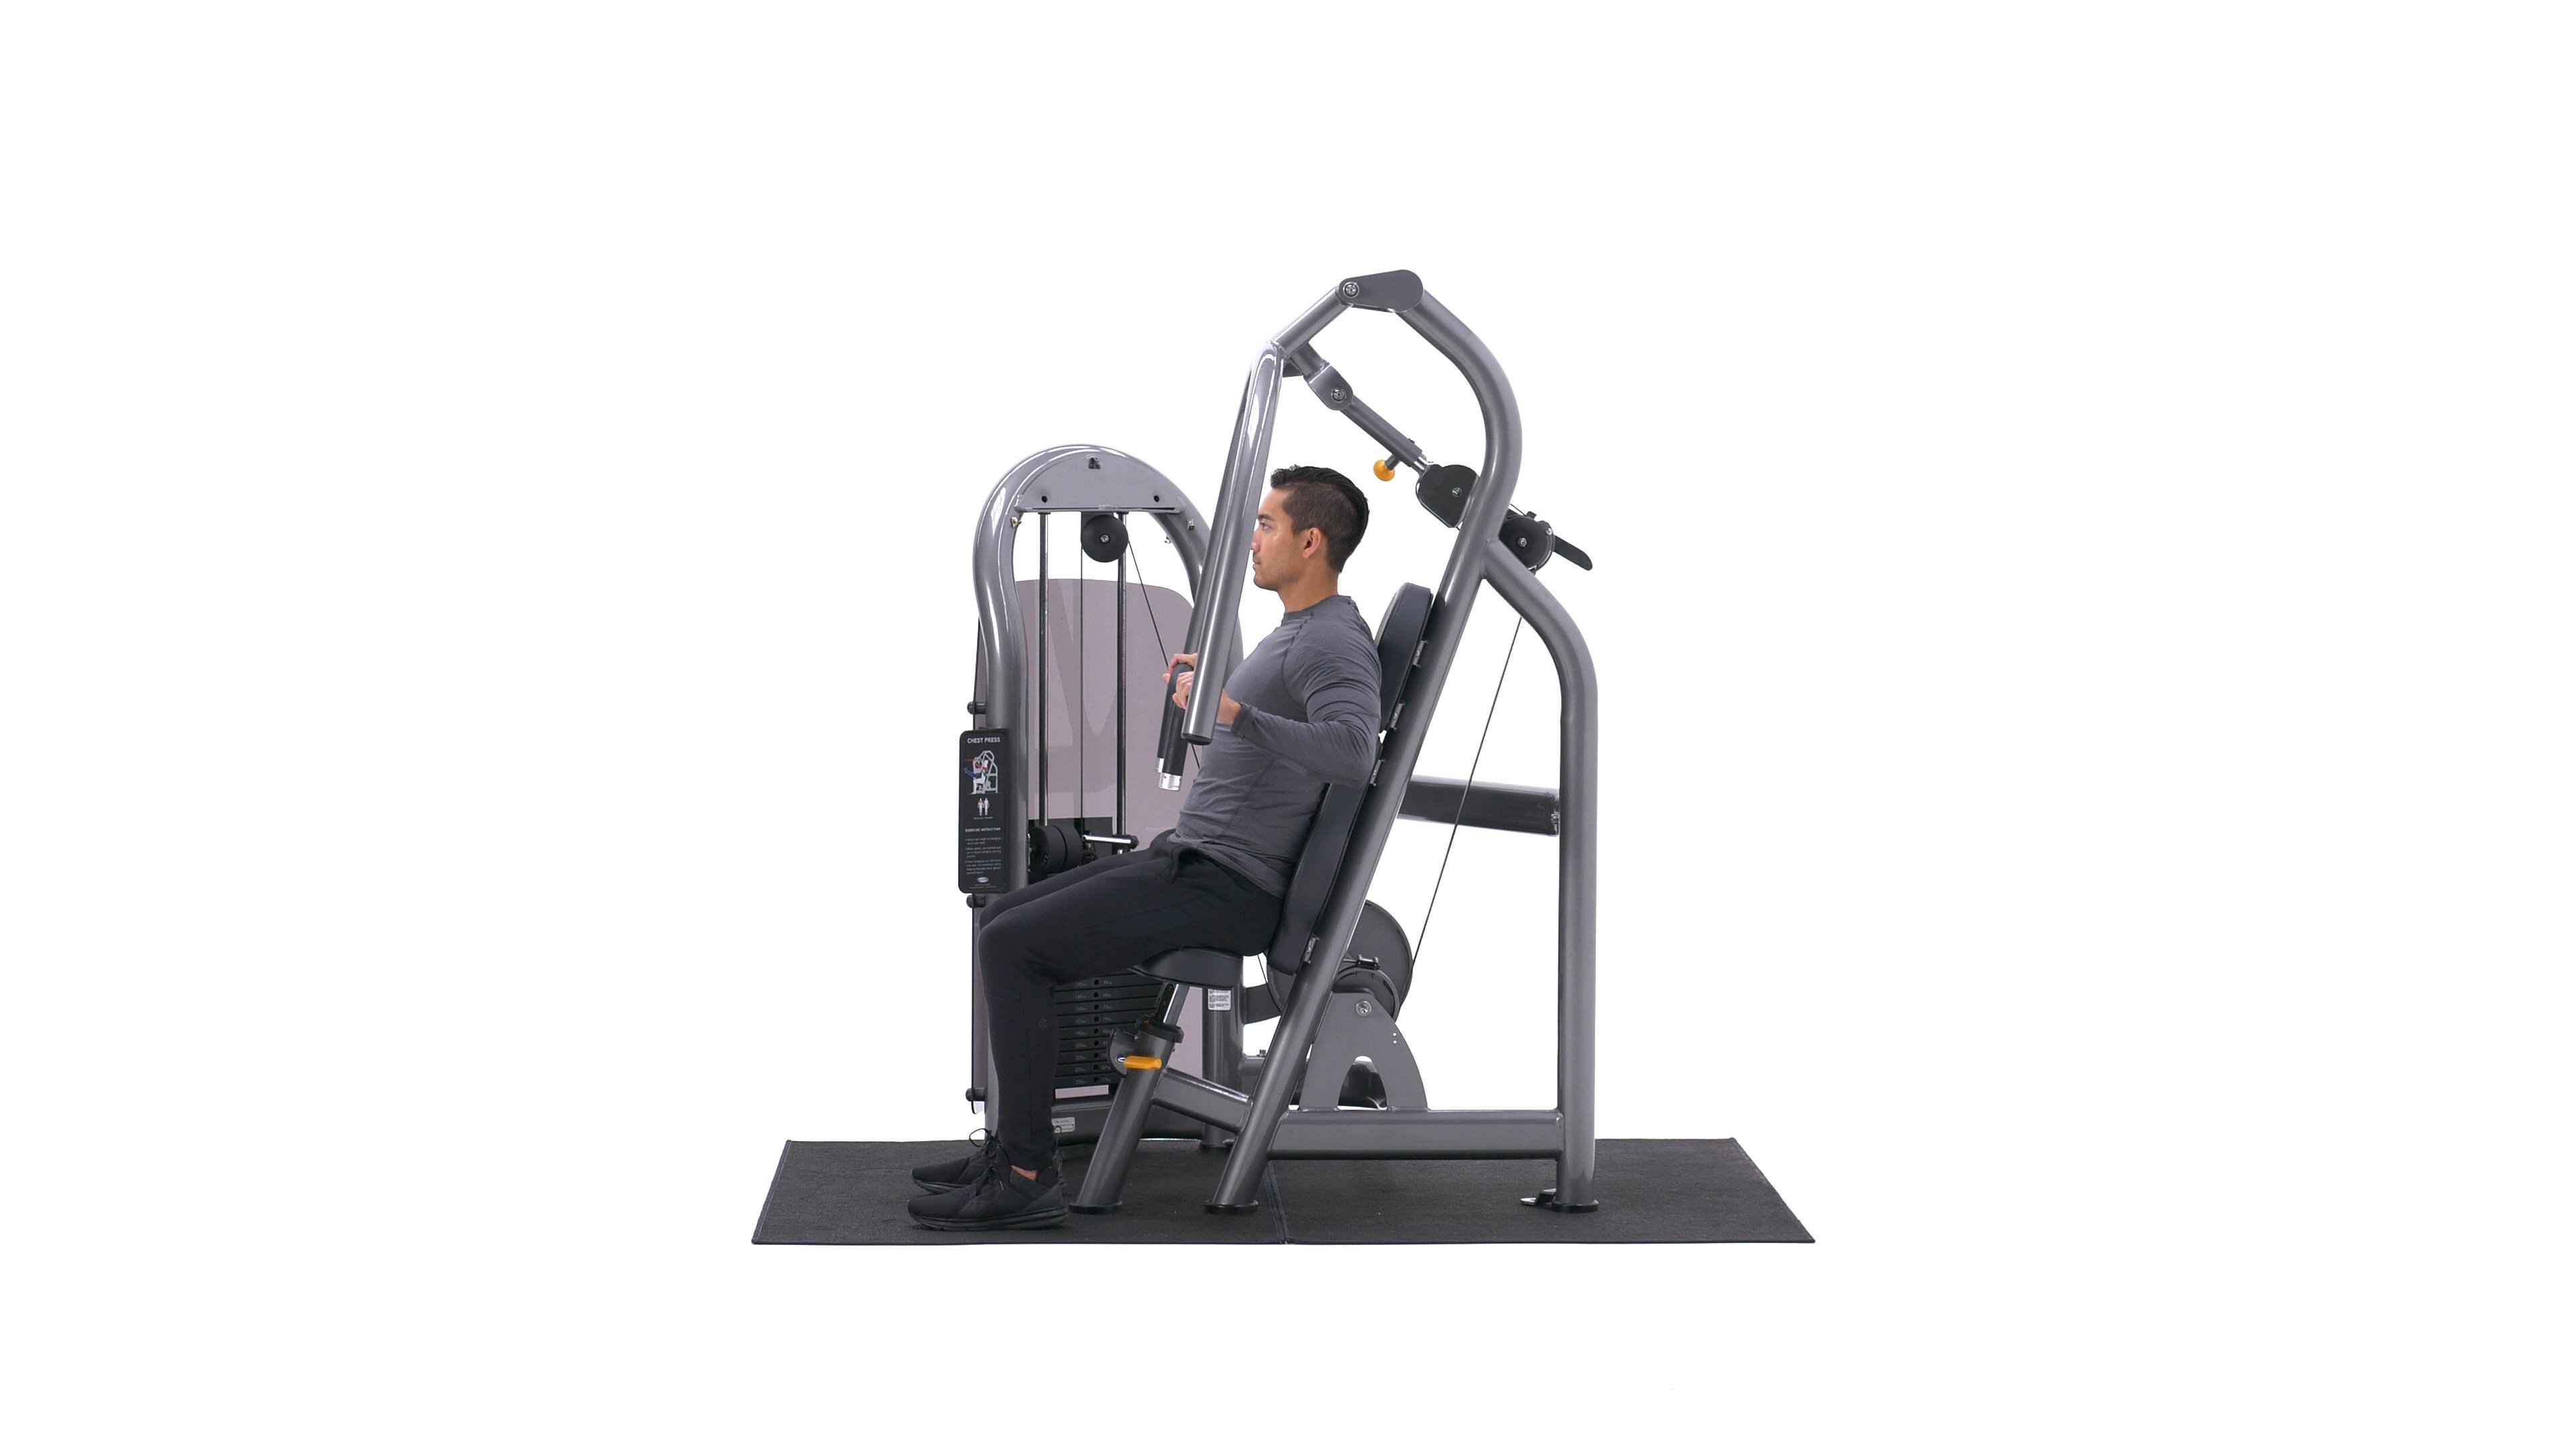 Machine Chest Press Exercise Videos Guides, 46% OFF